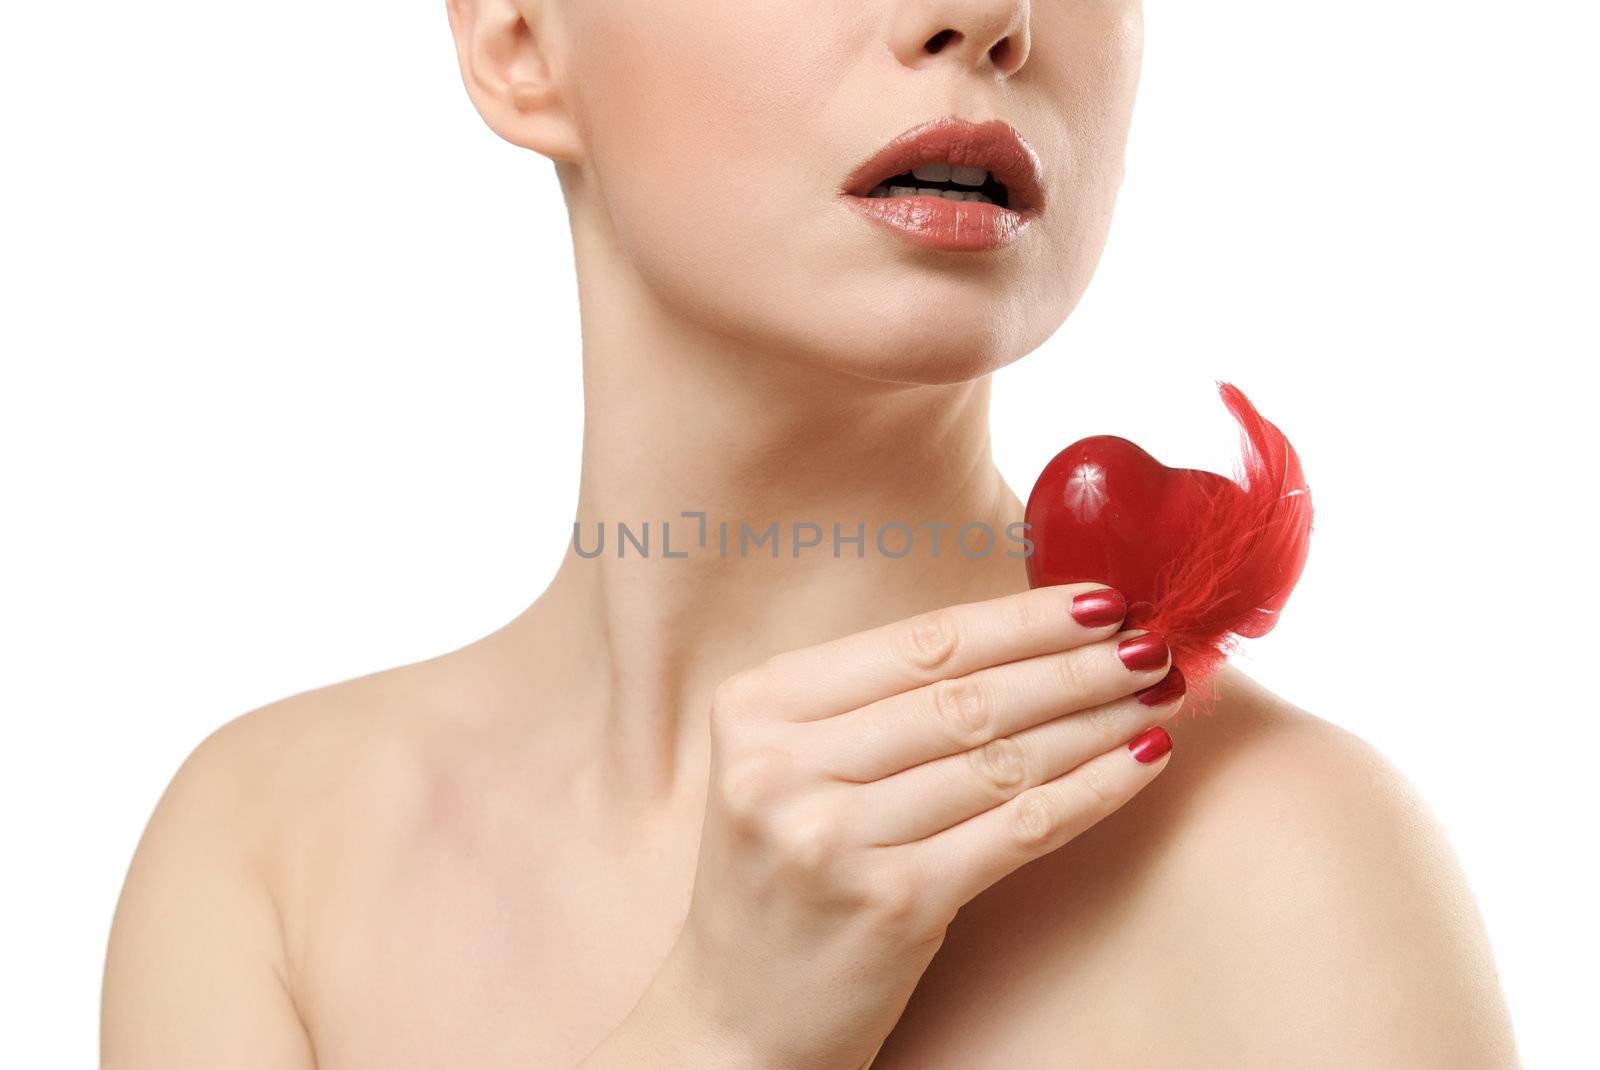 Beautiful woman holding red heart. Face closeup. Isolated on white background